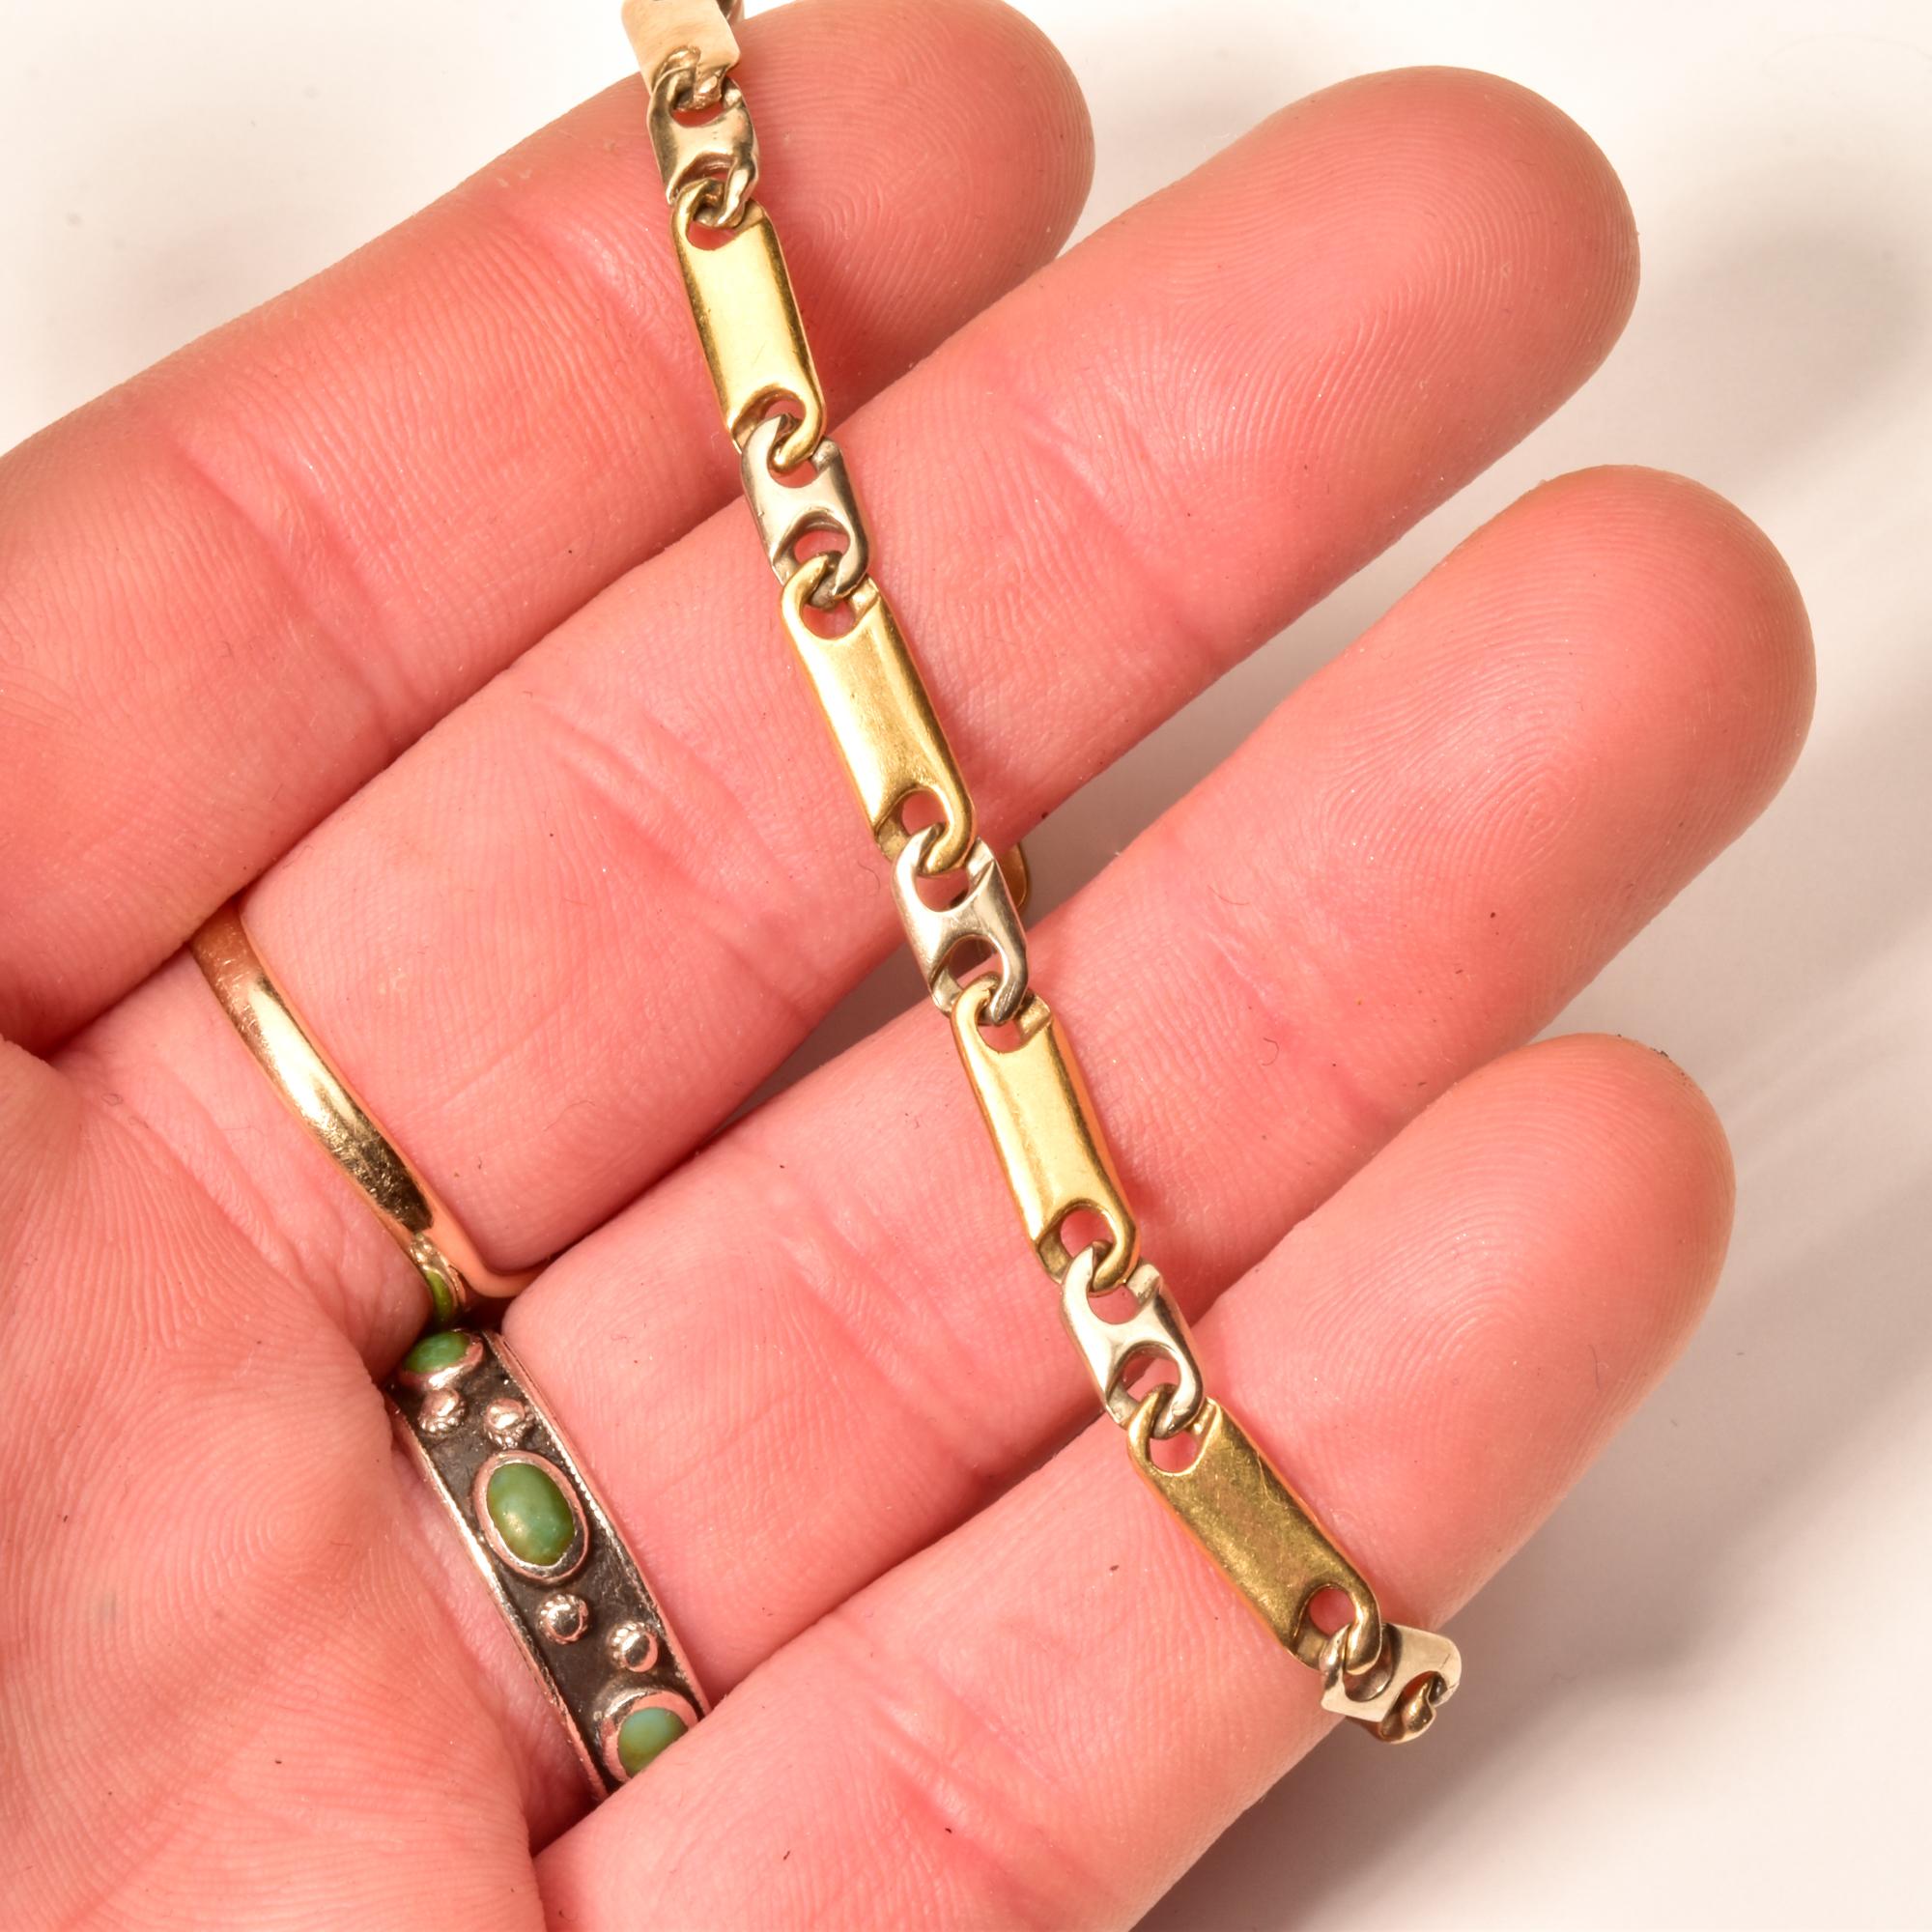 A stylish and solid 18k two-tone gold link bracelet for a modernist jewelry collection. Features a single strand of 'Gucci-style' yellow gold and white gold links with an old-style lobster claw clasp. The links look similar to a mariner chain, but